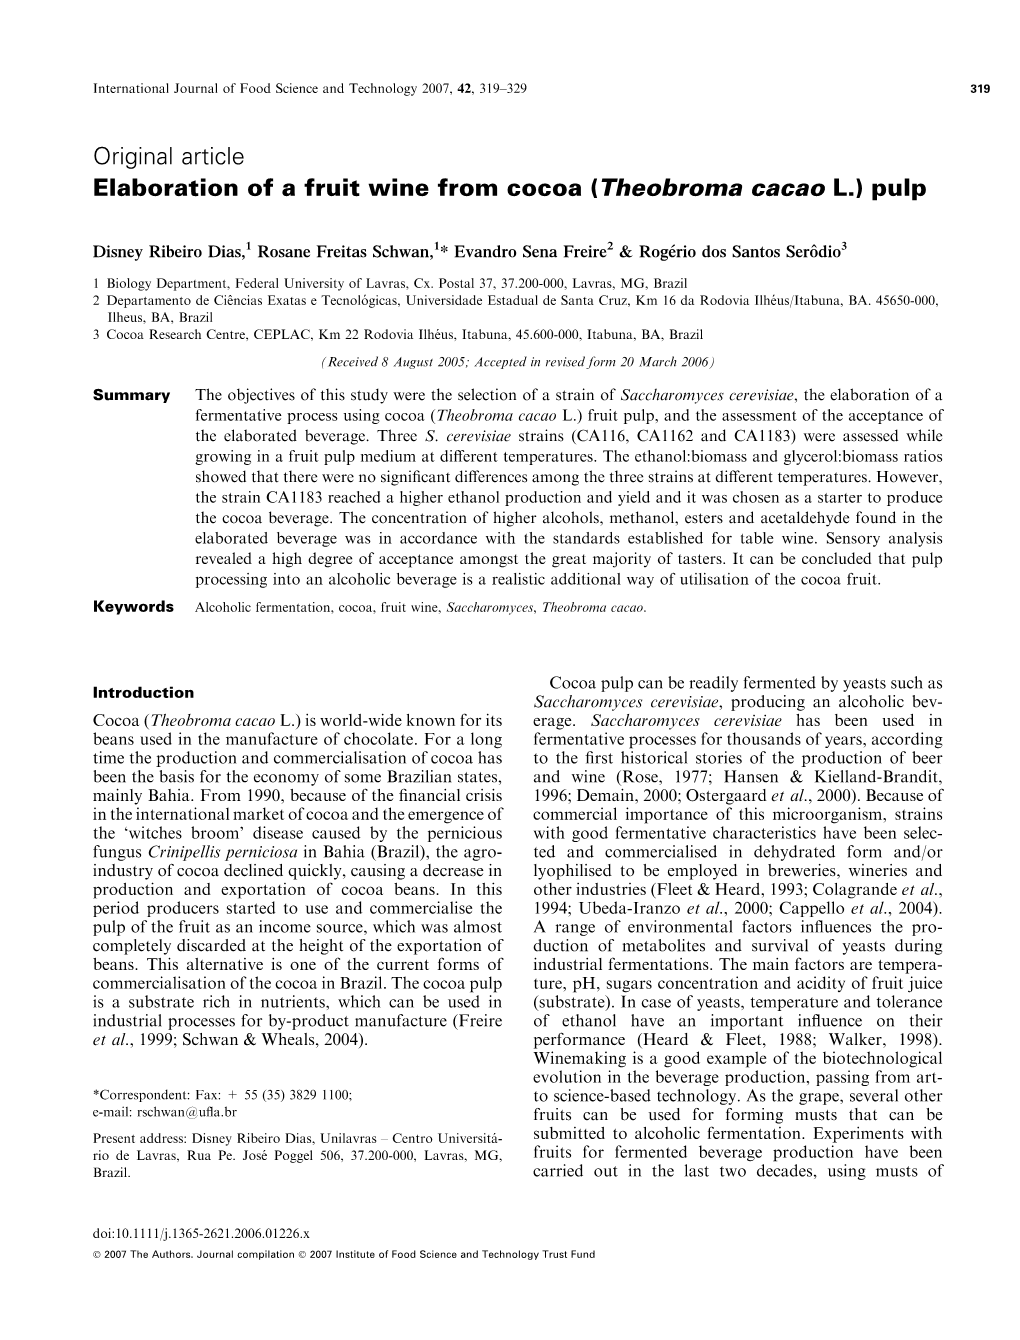 Original Article Elaboration of a Fruit Wine from Cocoa (Theobroma Cacao L.) Pulp